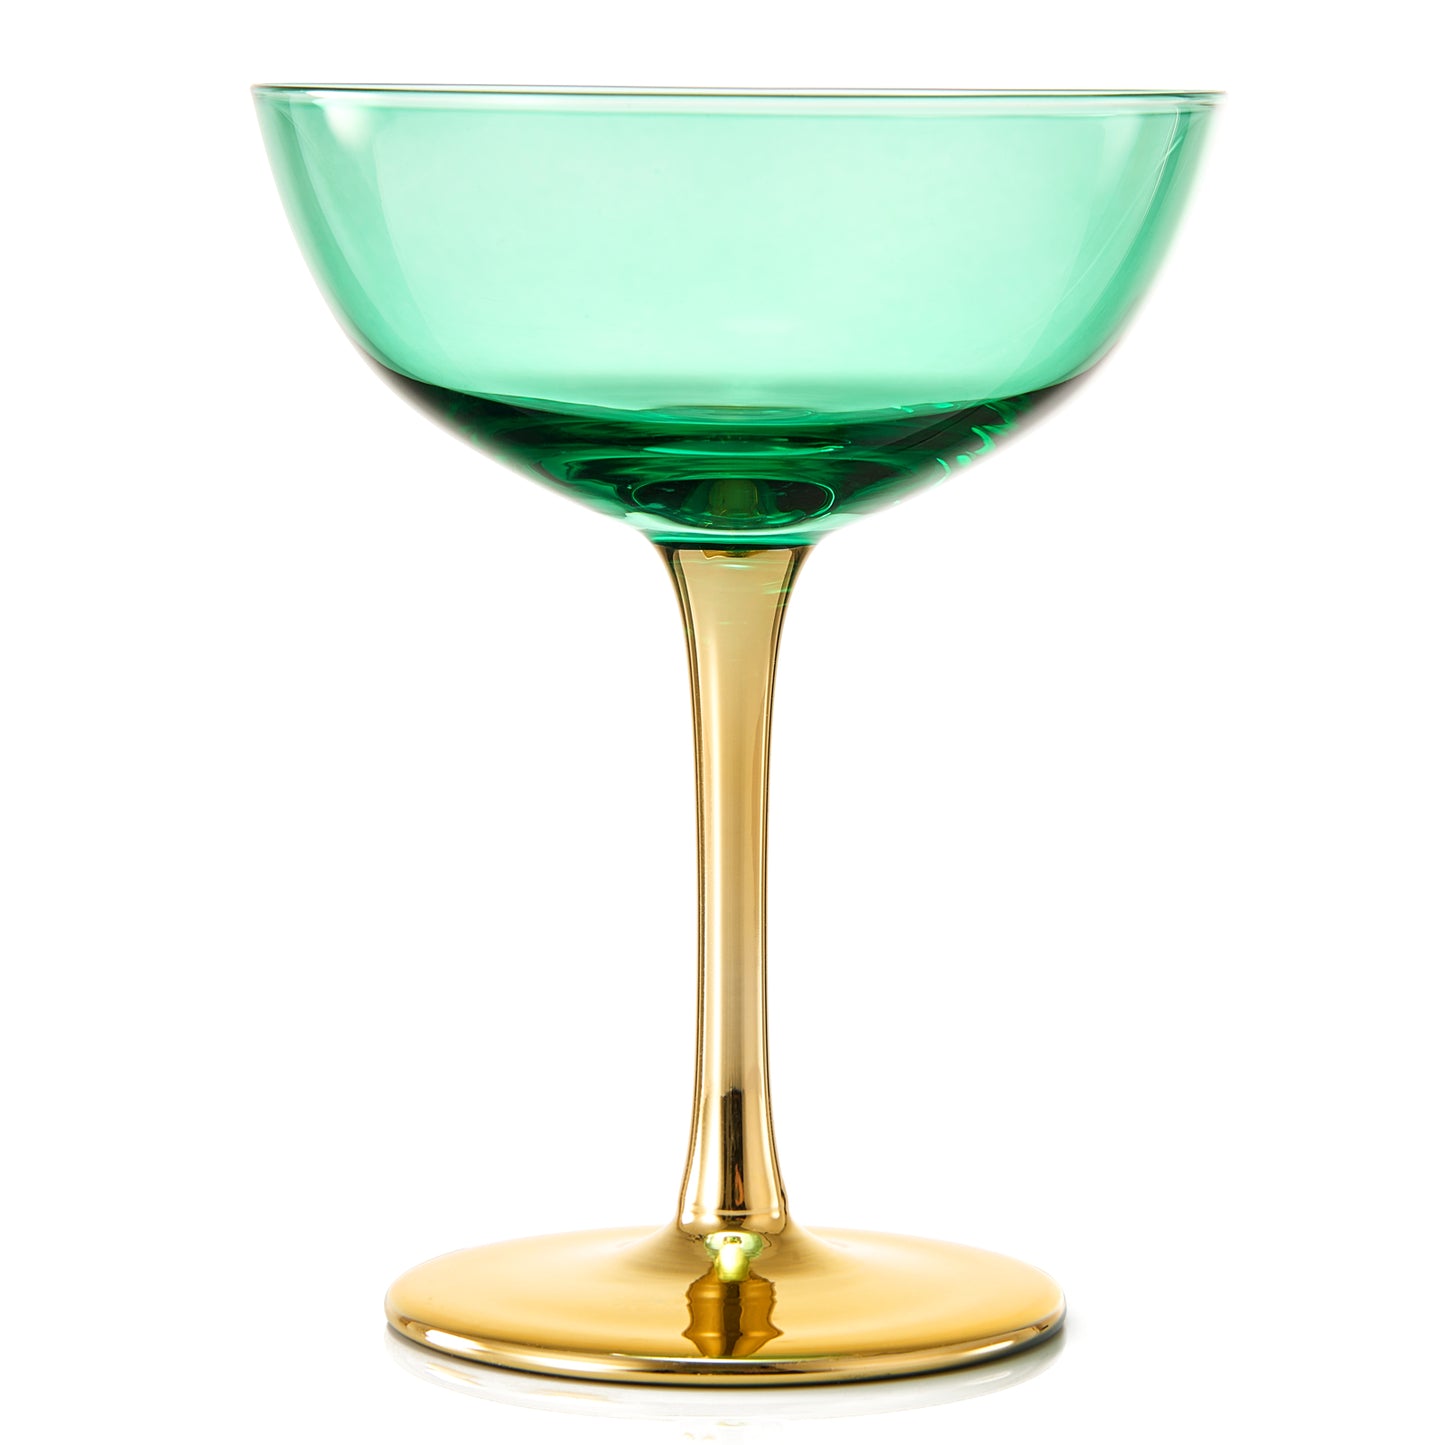 Deco Coupe Cocktail Glassware, Set of 2